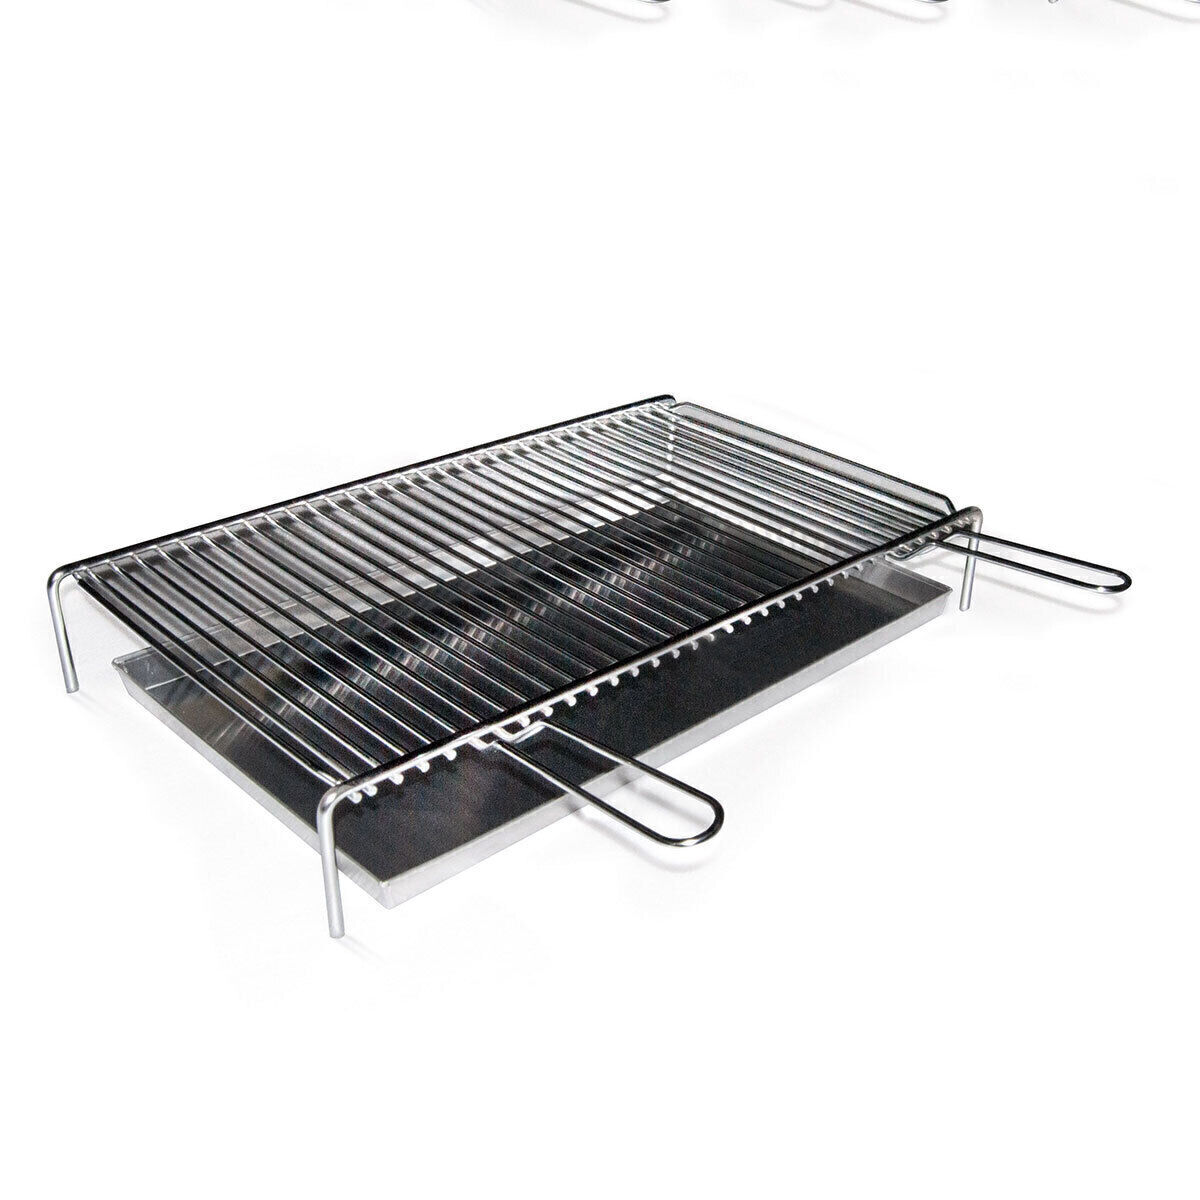 Fontana - Stainless Steel Grill & Roasting Set product image